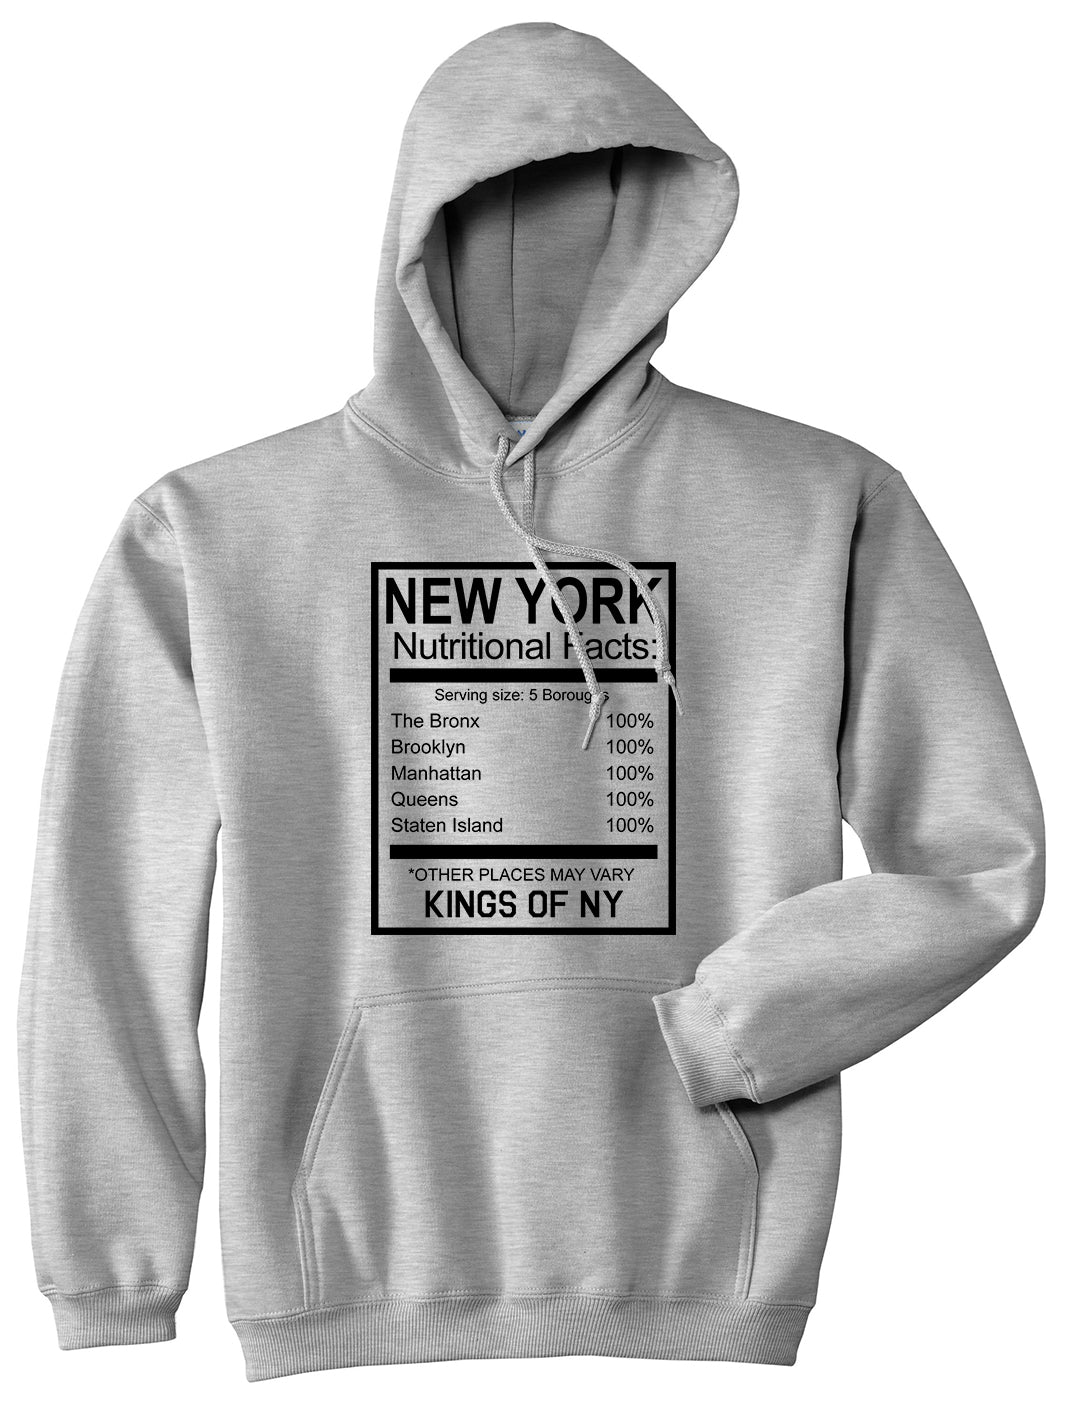 New York Nutritional Facts Pullover Hoodie in Grey